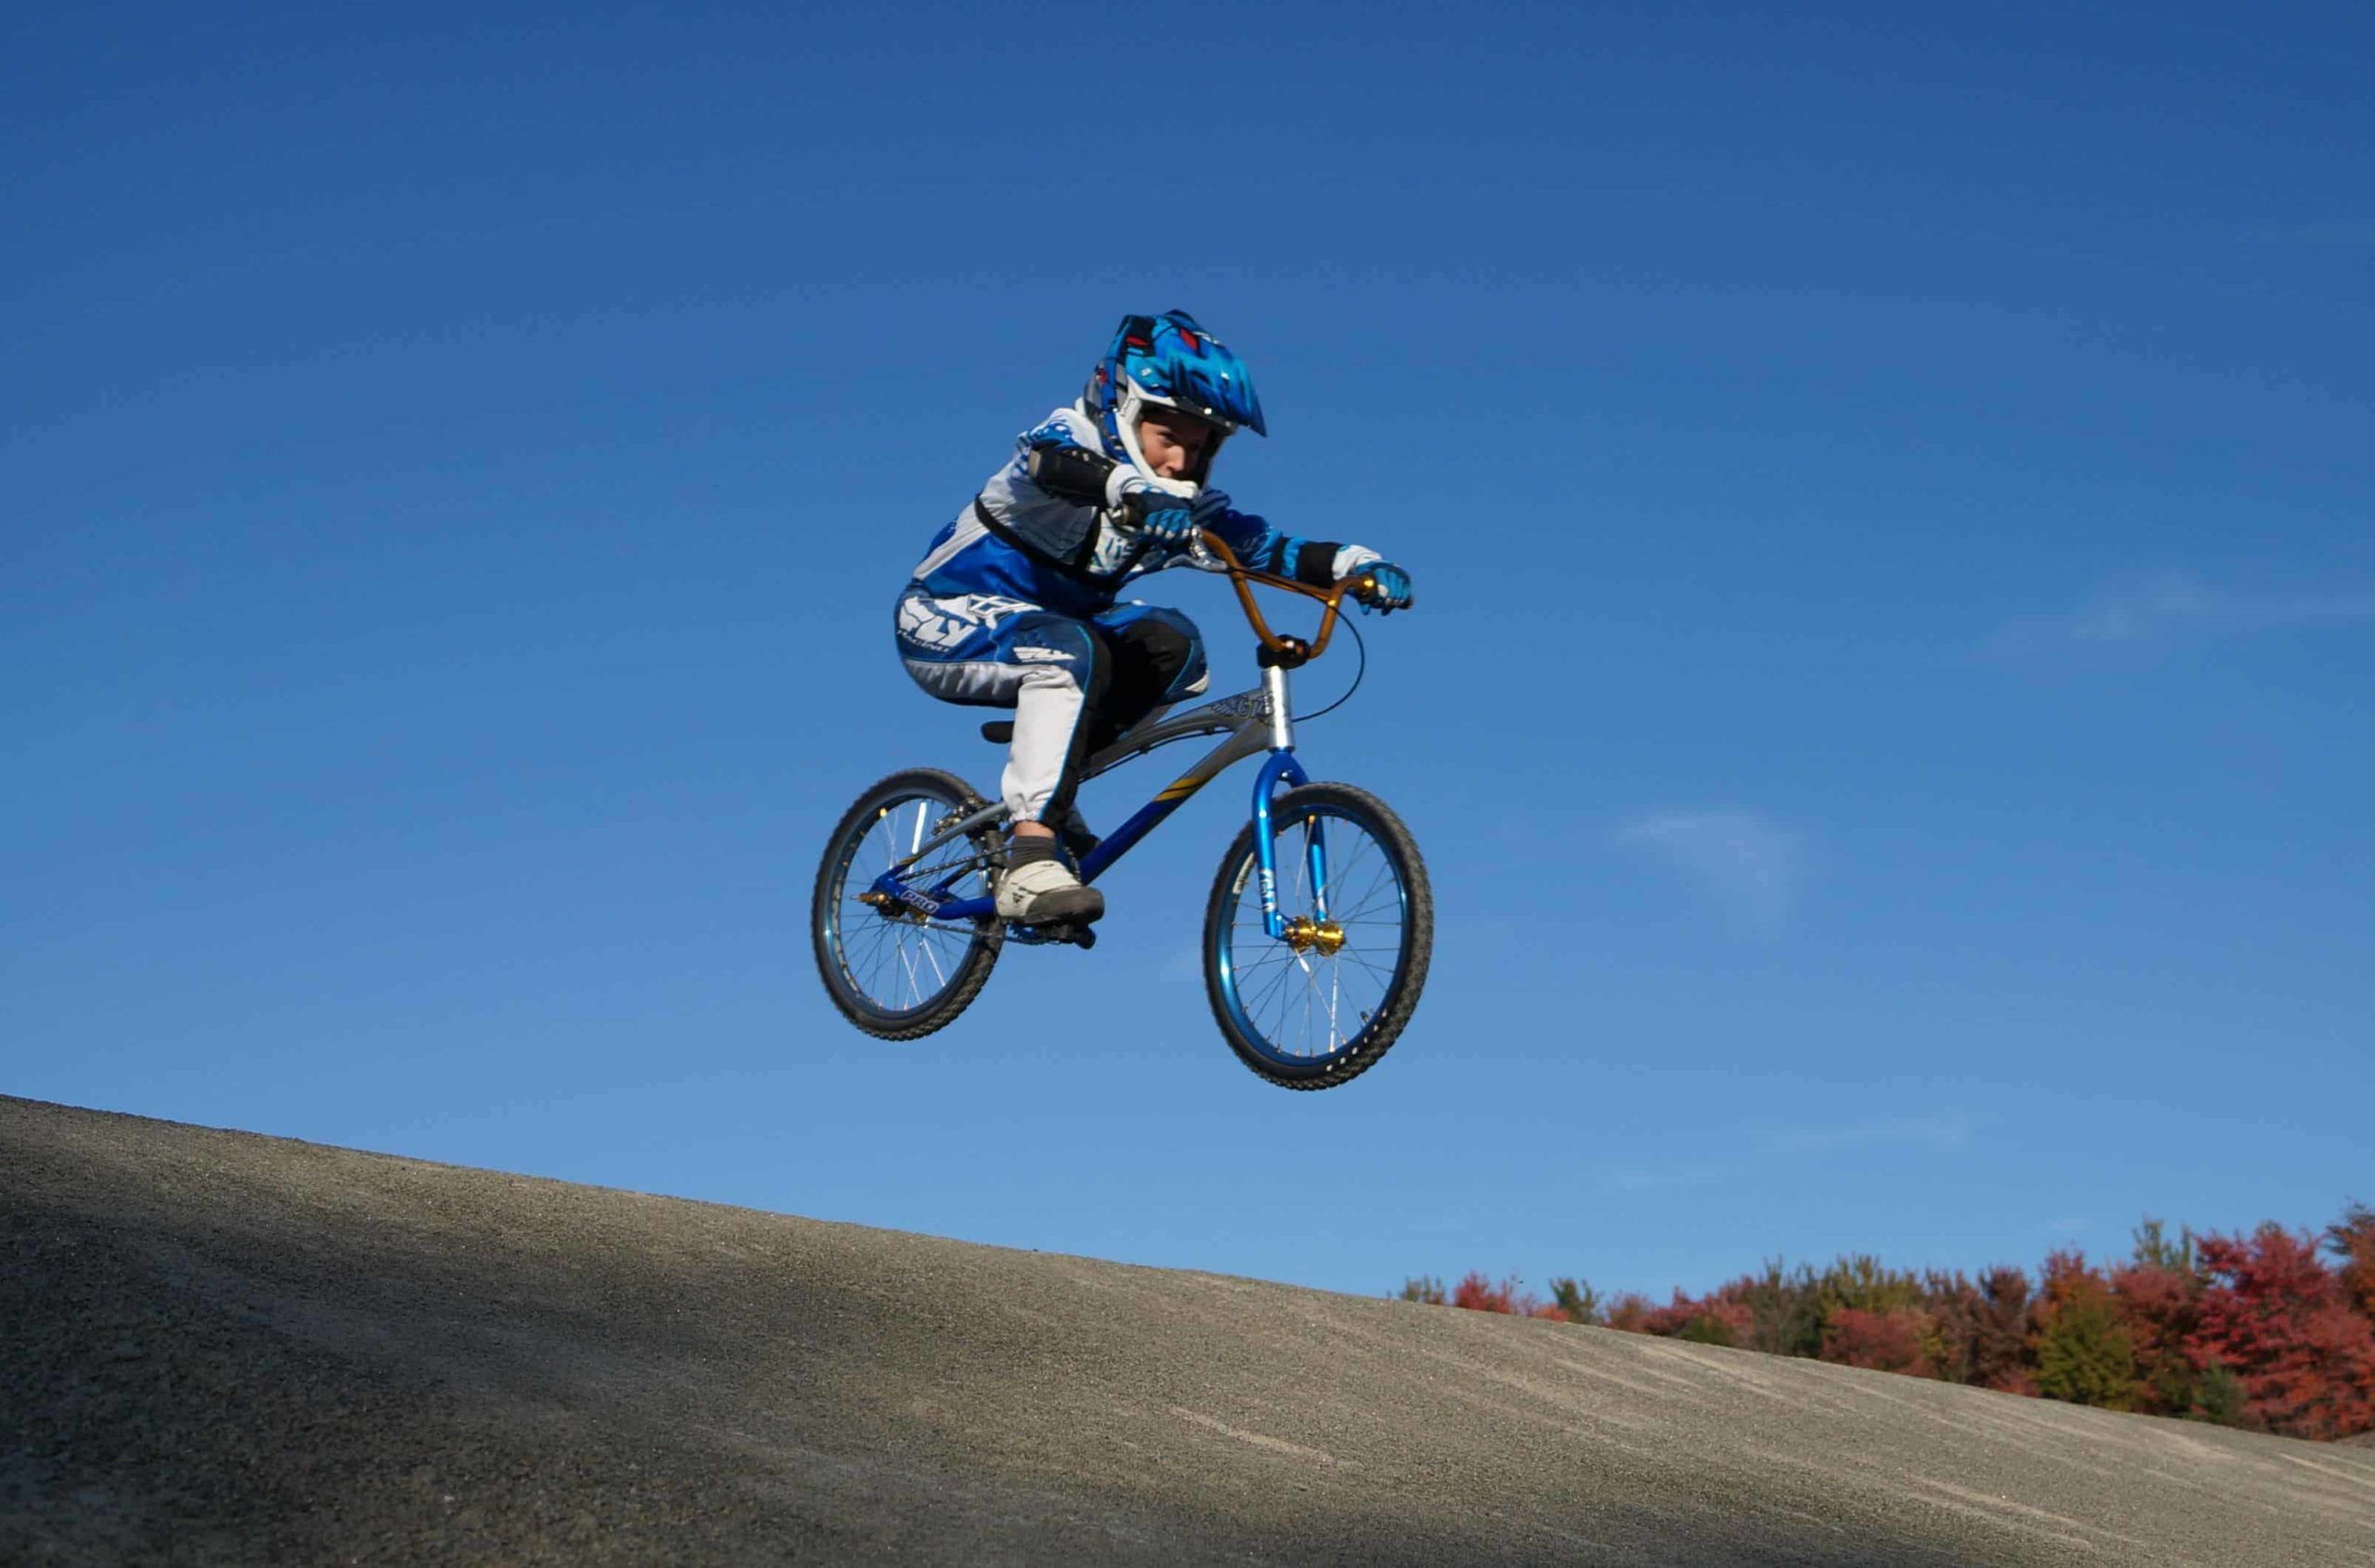 Max Competes in BMX Racing